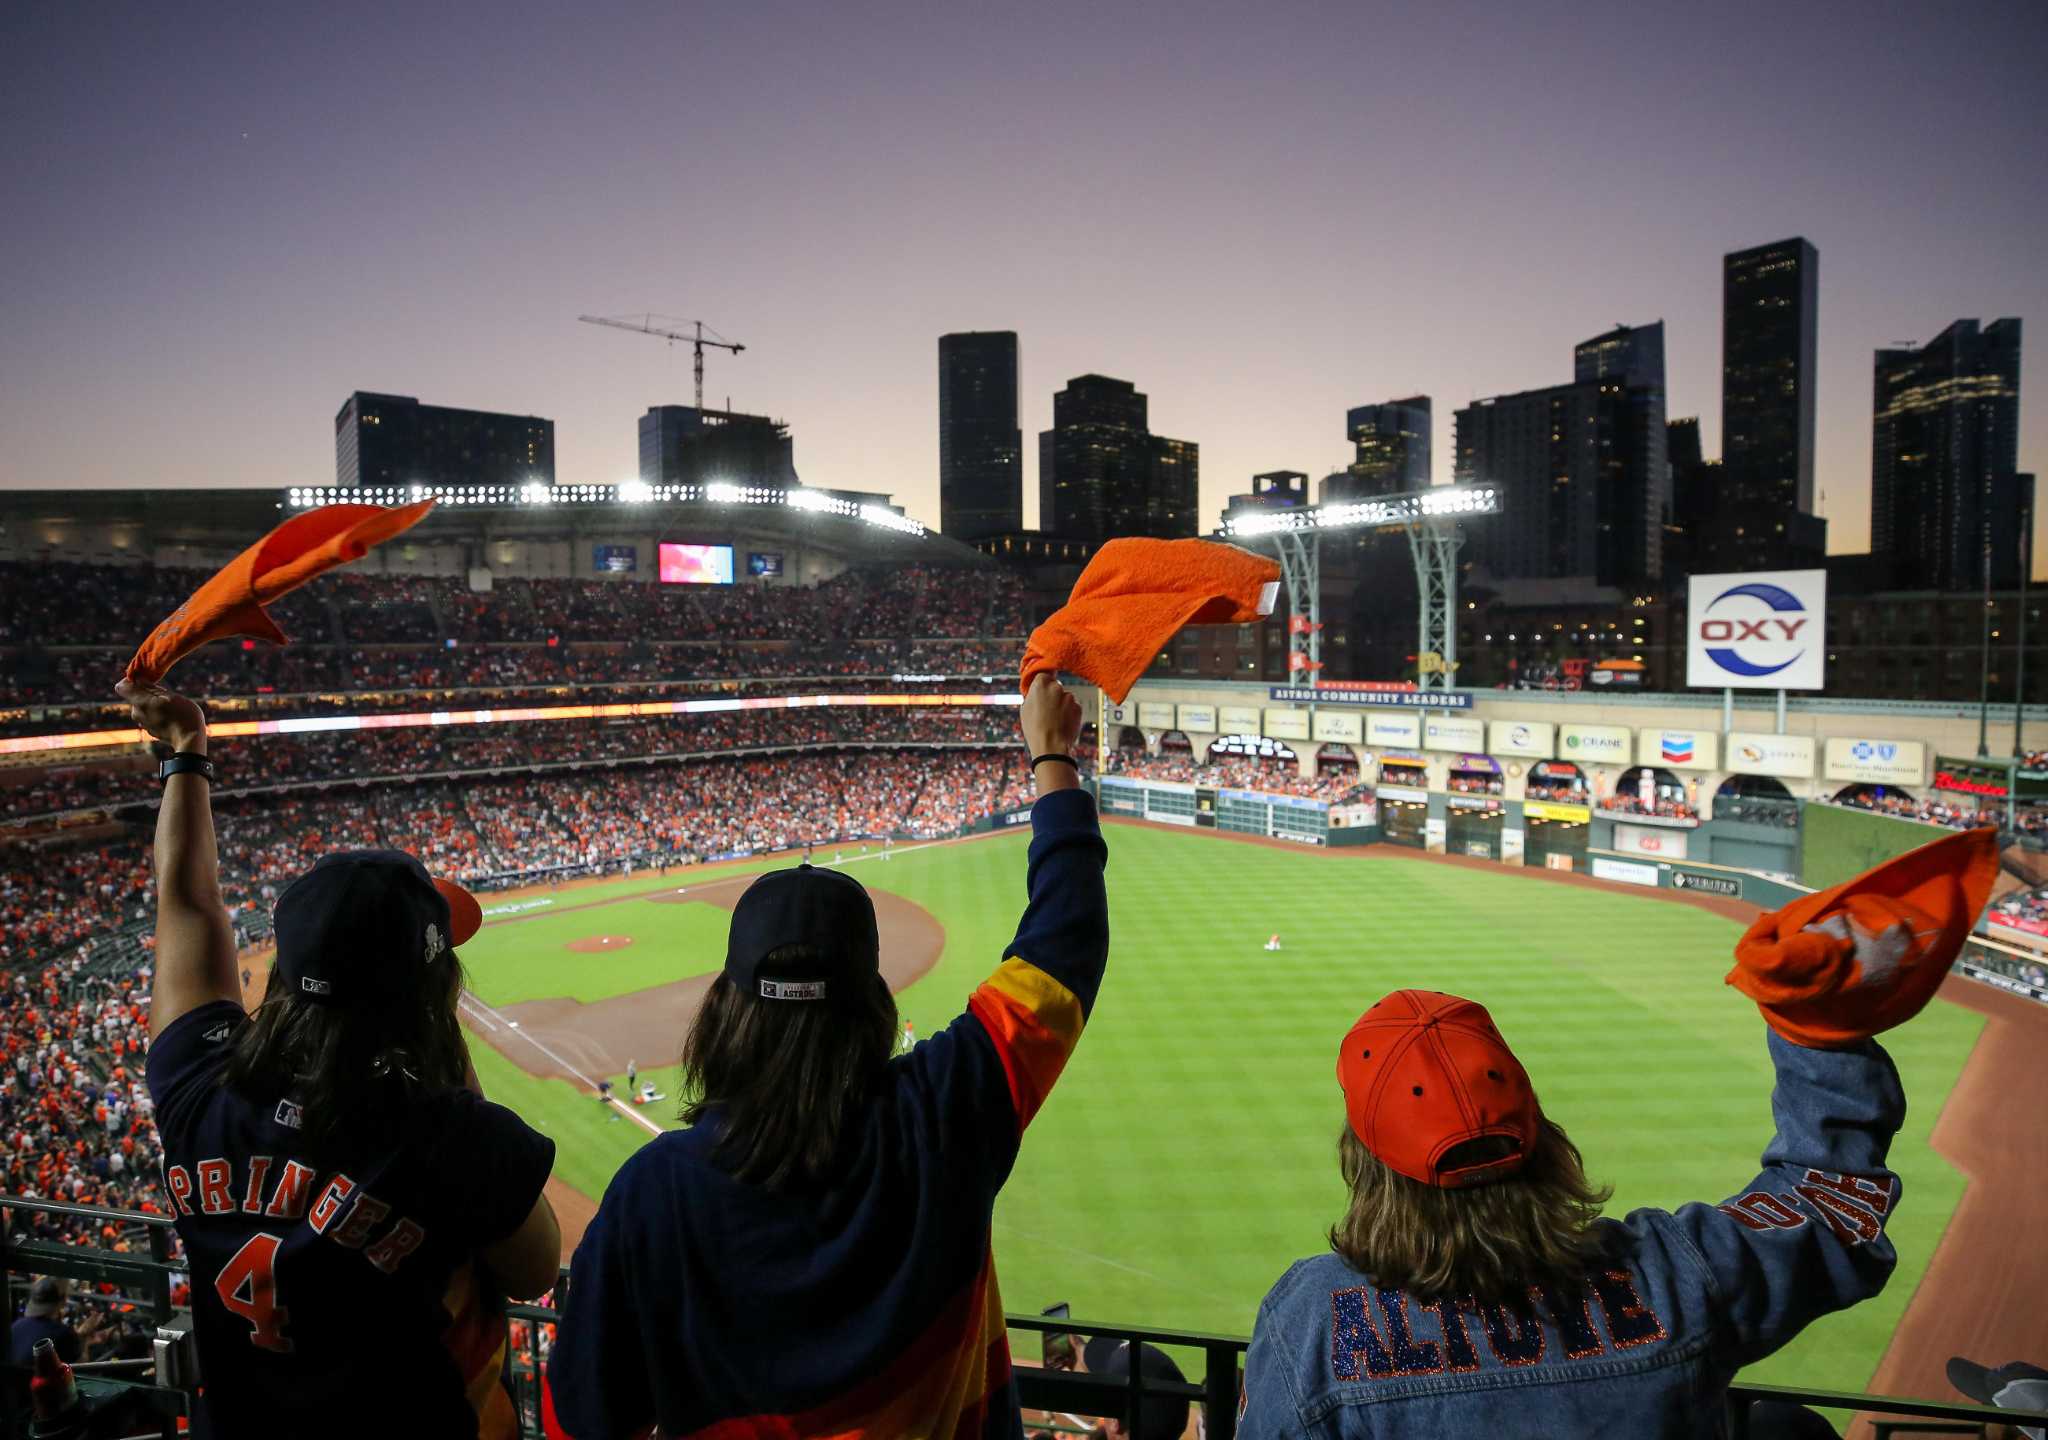 POLL: Do you think having Minute Maid Park roof closed improves how the  Houston Astros play?